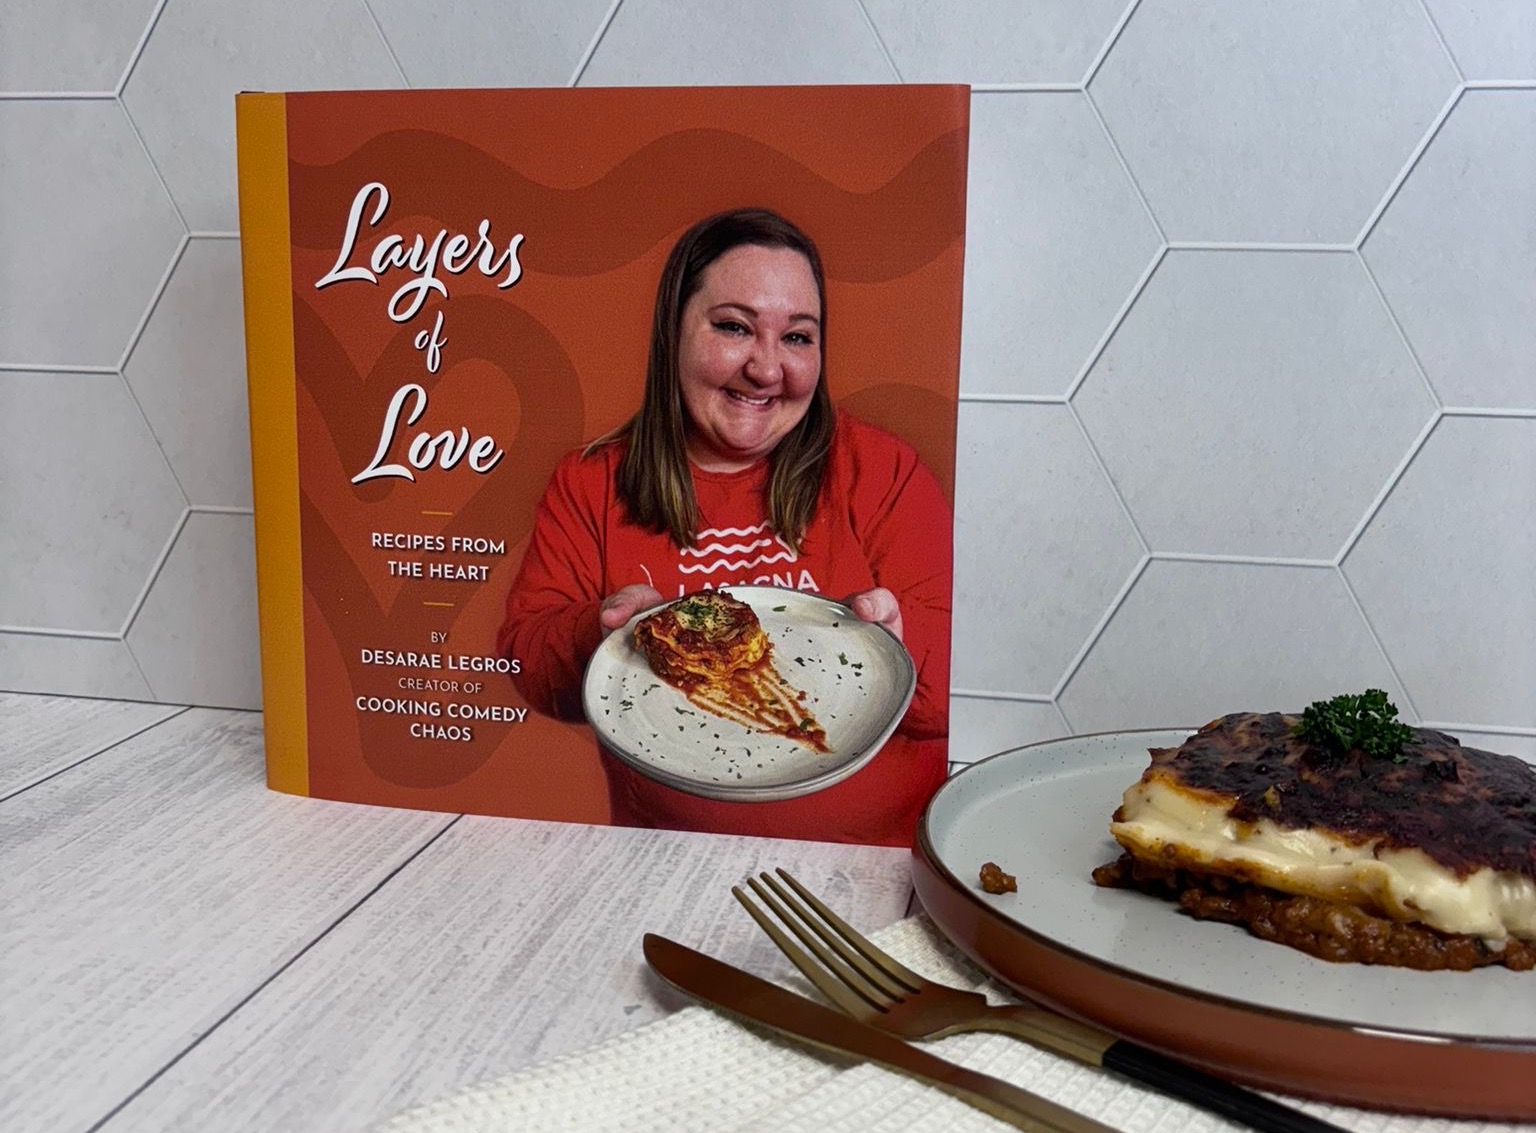 A photo of the Layers of Love book by Desarae Legros next to a plate of lasagna.